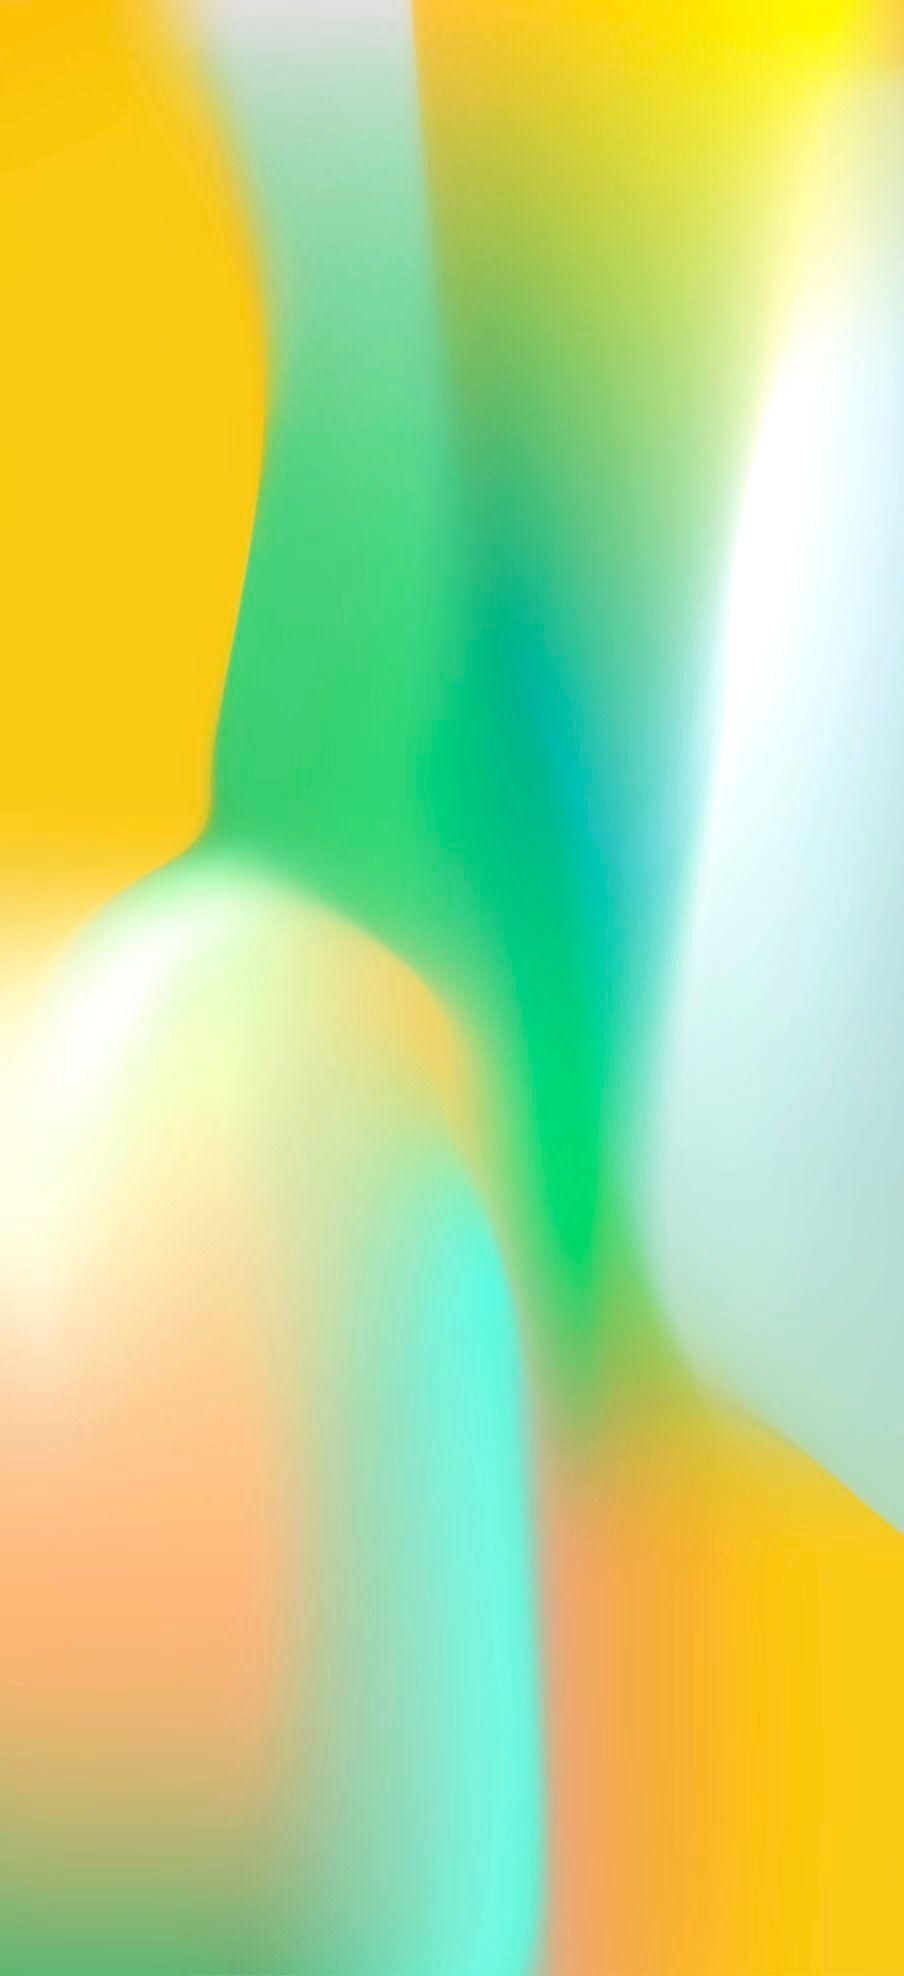 iOS iPhone X, yellow, green, Stock, abstract, apple, wallpaper